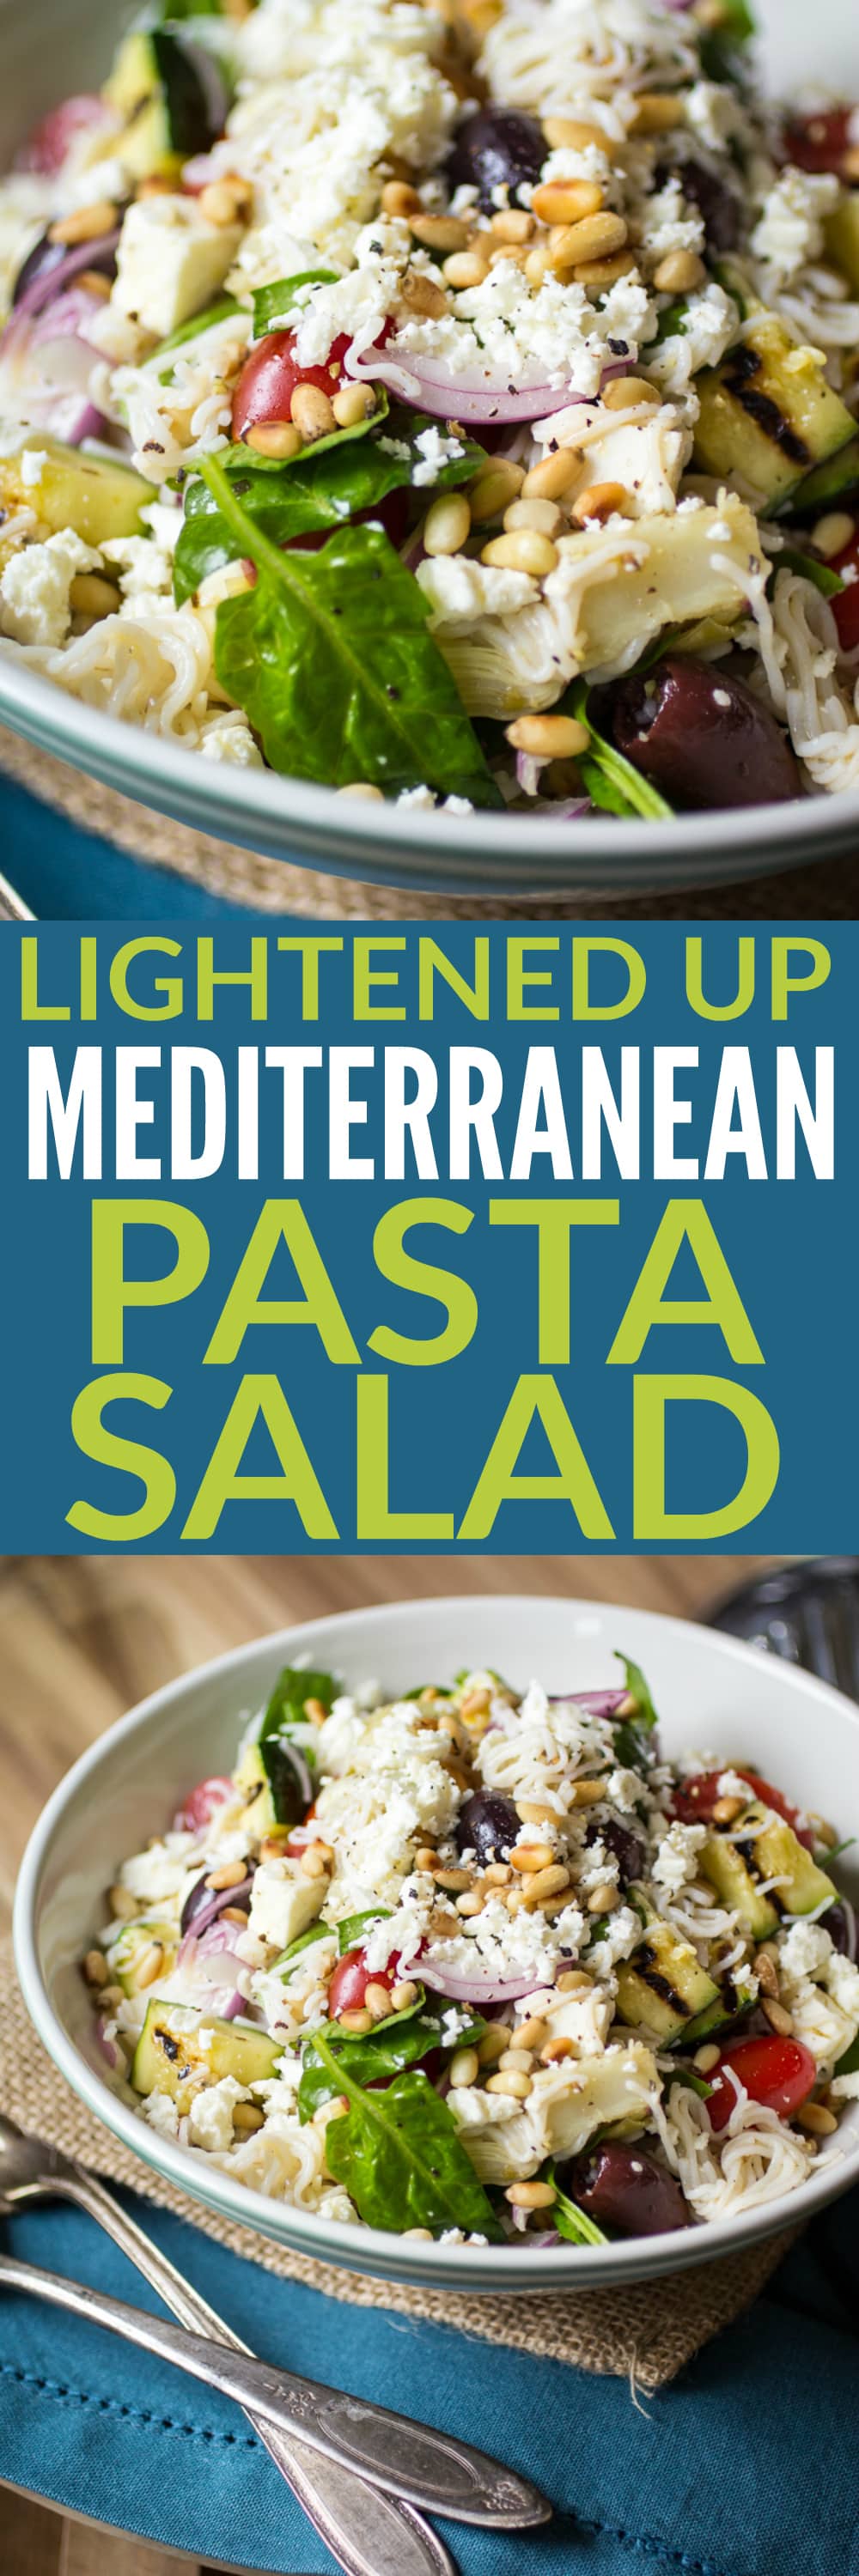 Mediterranean Pasta Salad gets a lightened-up makeover using tofu shirataki noodles. Studded with tomatoes, zucchini, artichokes, and olives, this is one potluck dish that everyone will love!